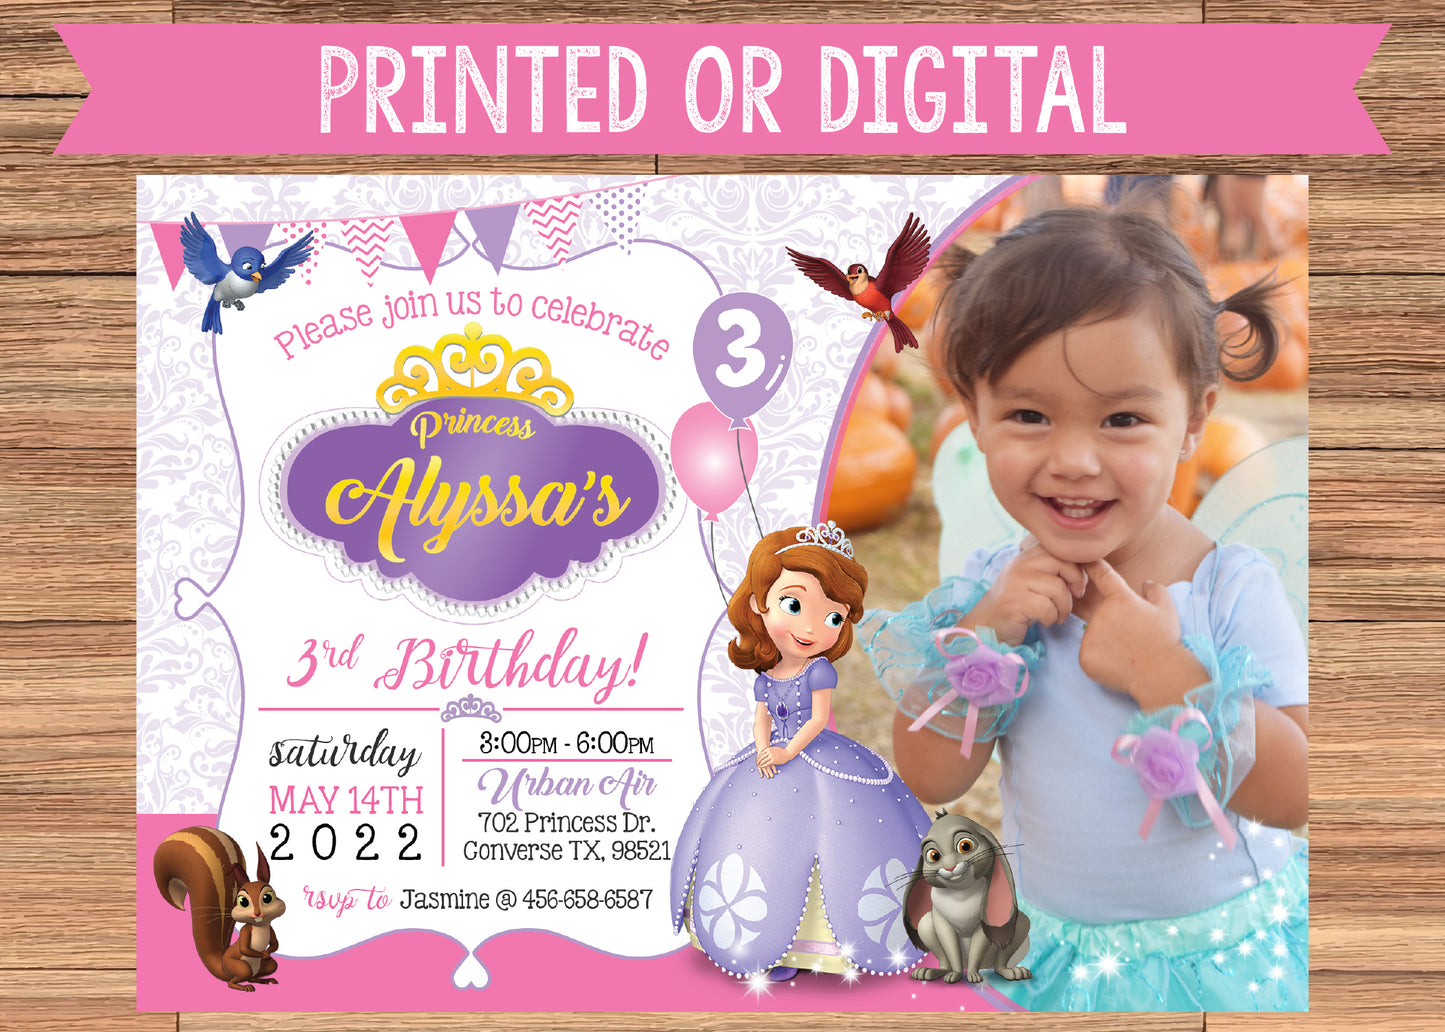 SOFIA THE FIRST Printed or Digital Birthday Party Invitation With Photo!